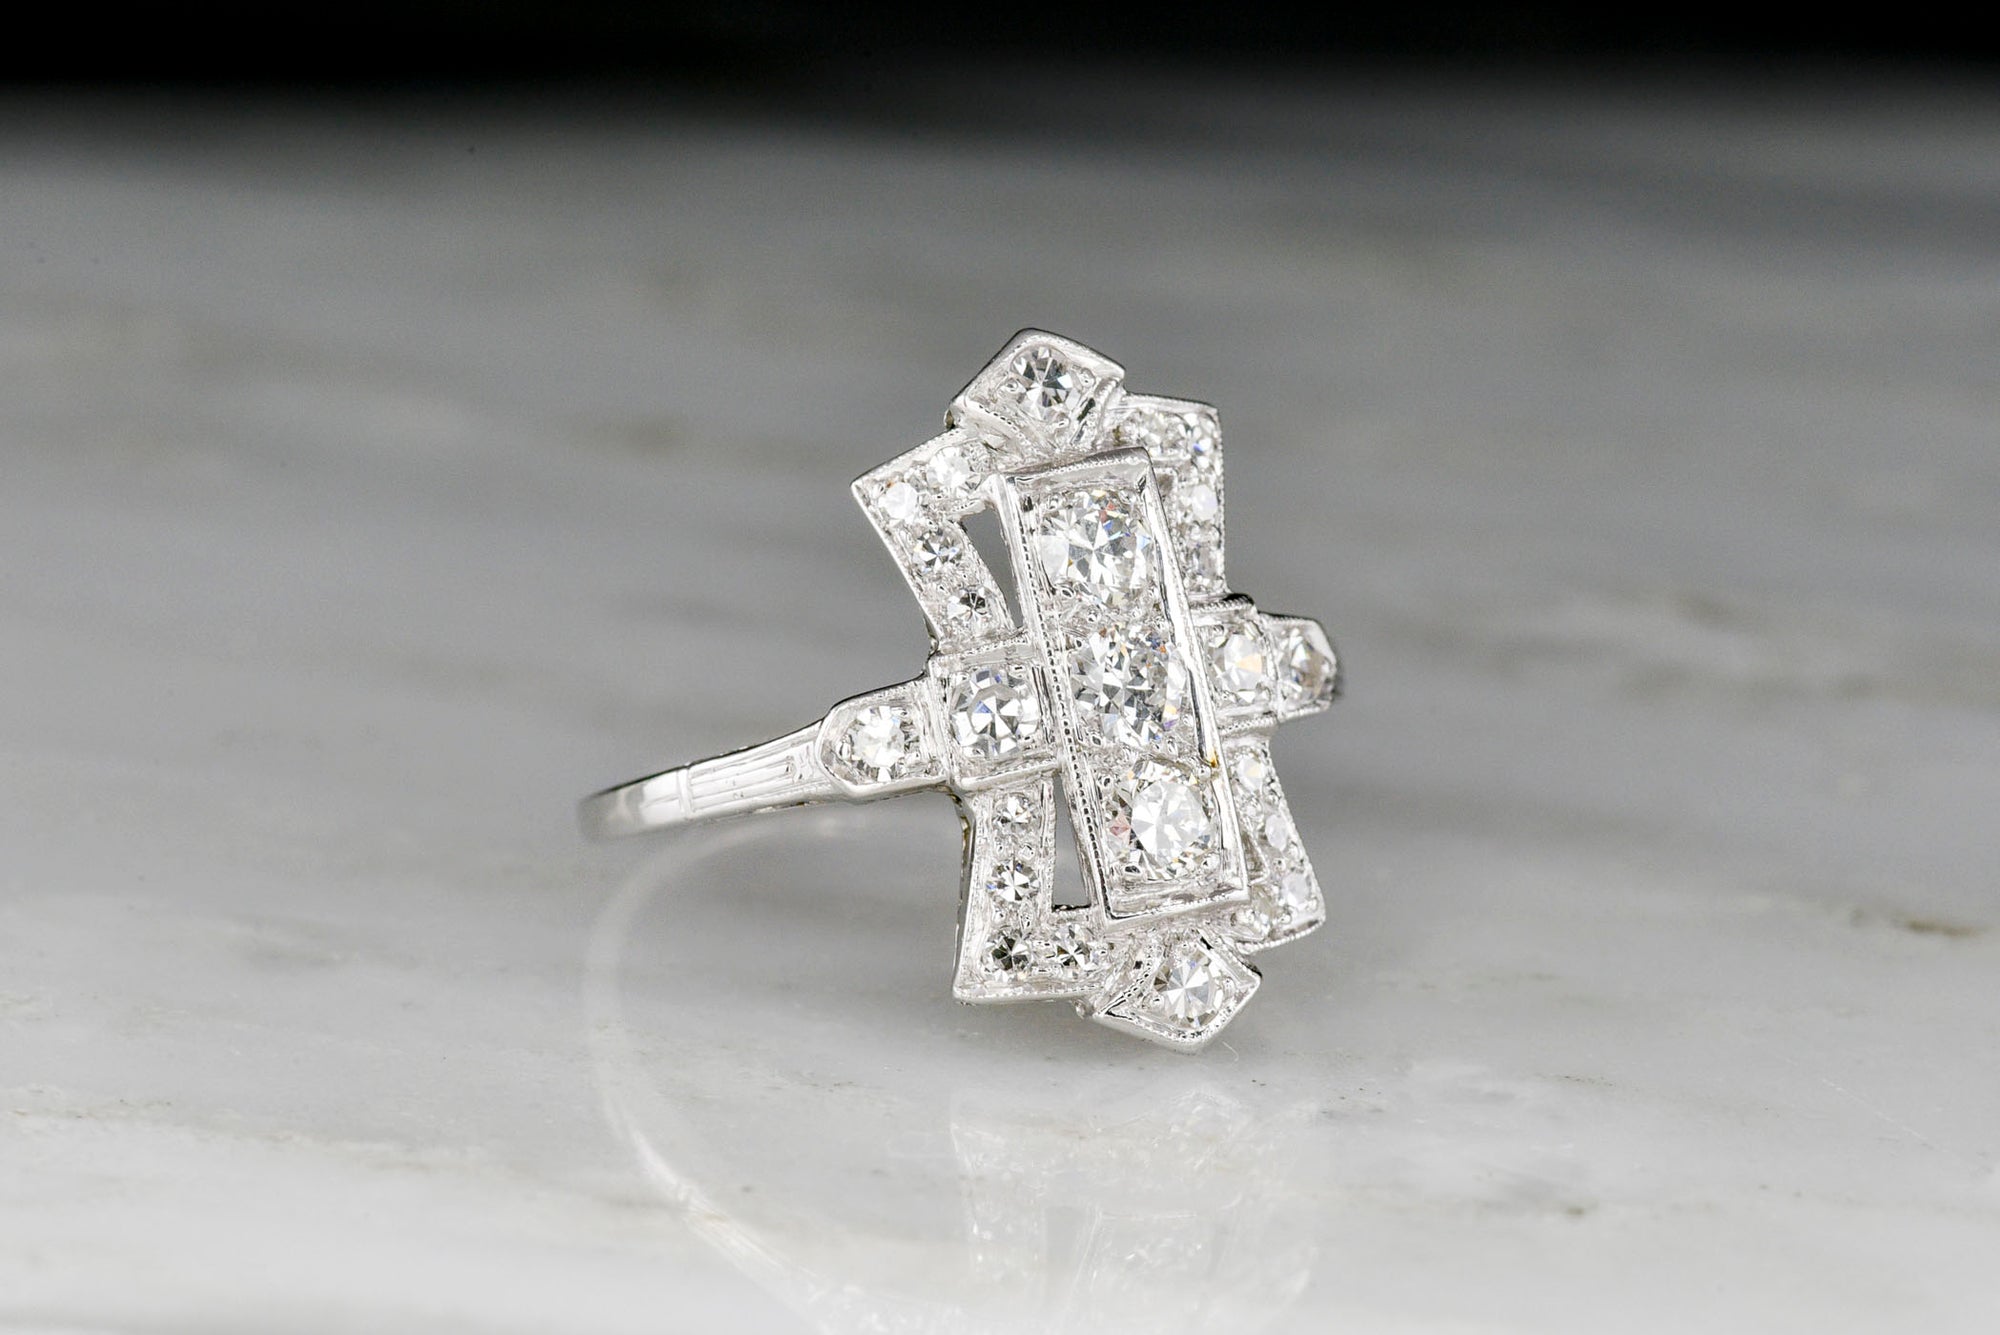 Vintage Art Deco Dinner Ring with Transitional and Single Cut Diamonds